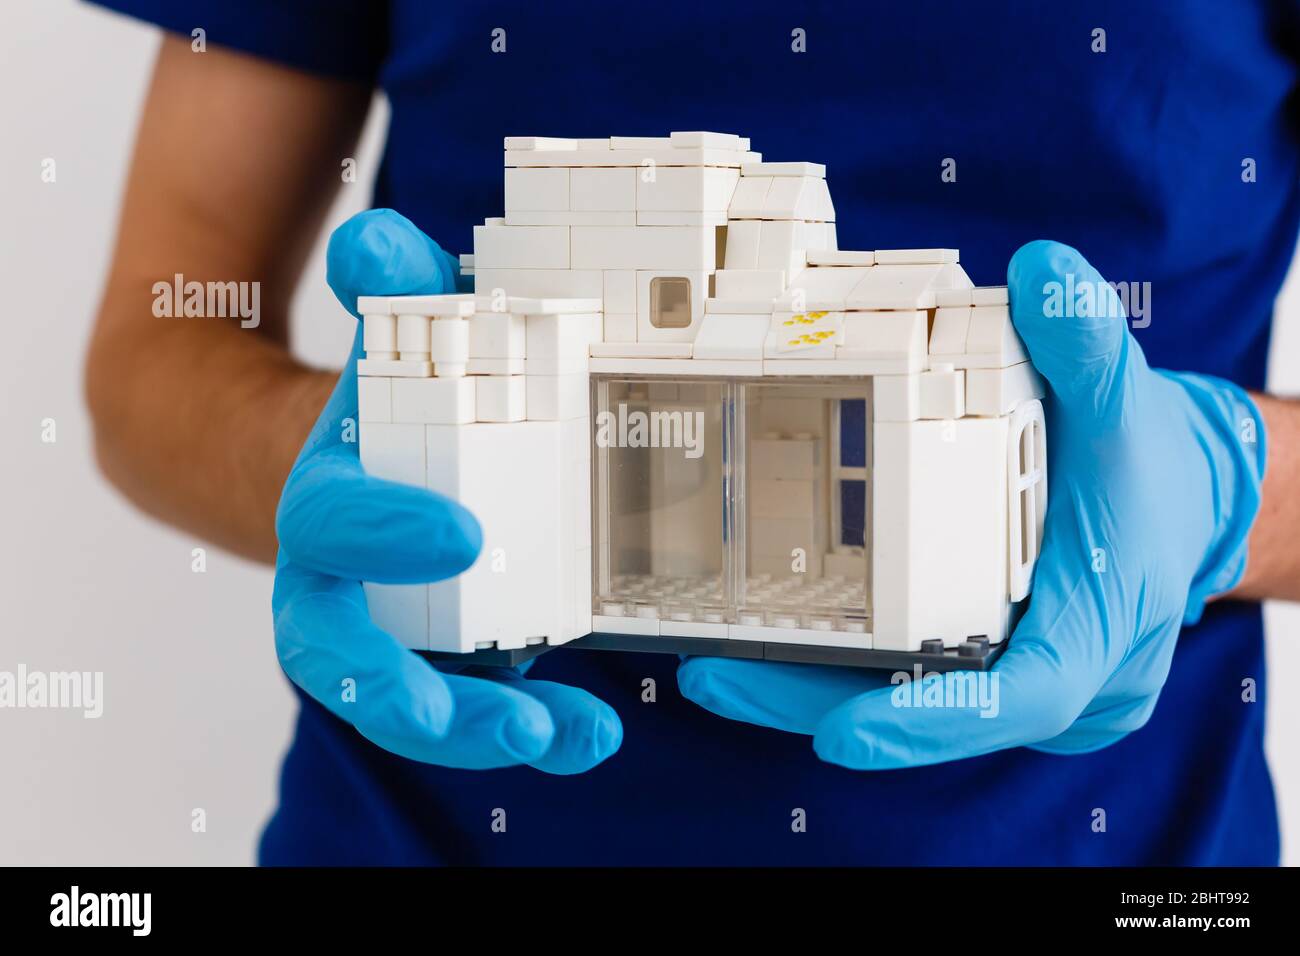 small wooden house in the palm of your hand with a white medical rubber glove, blue background, wooden model of the house, quarantine concept Stock Photo